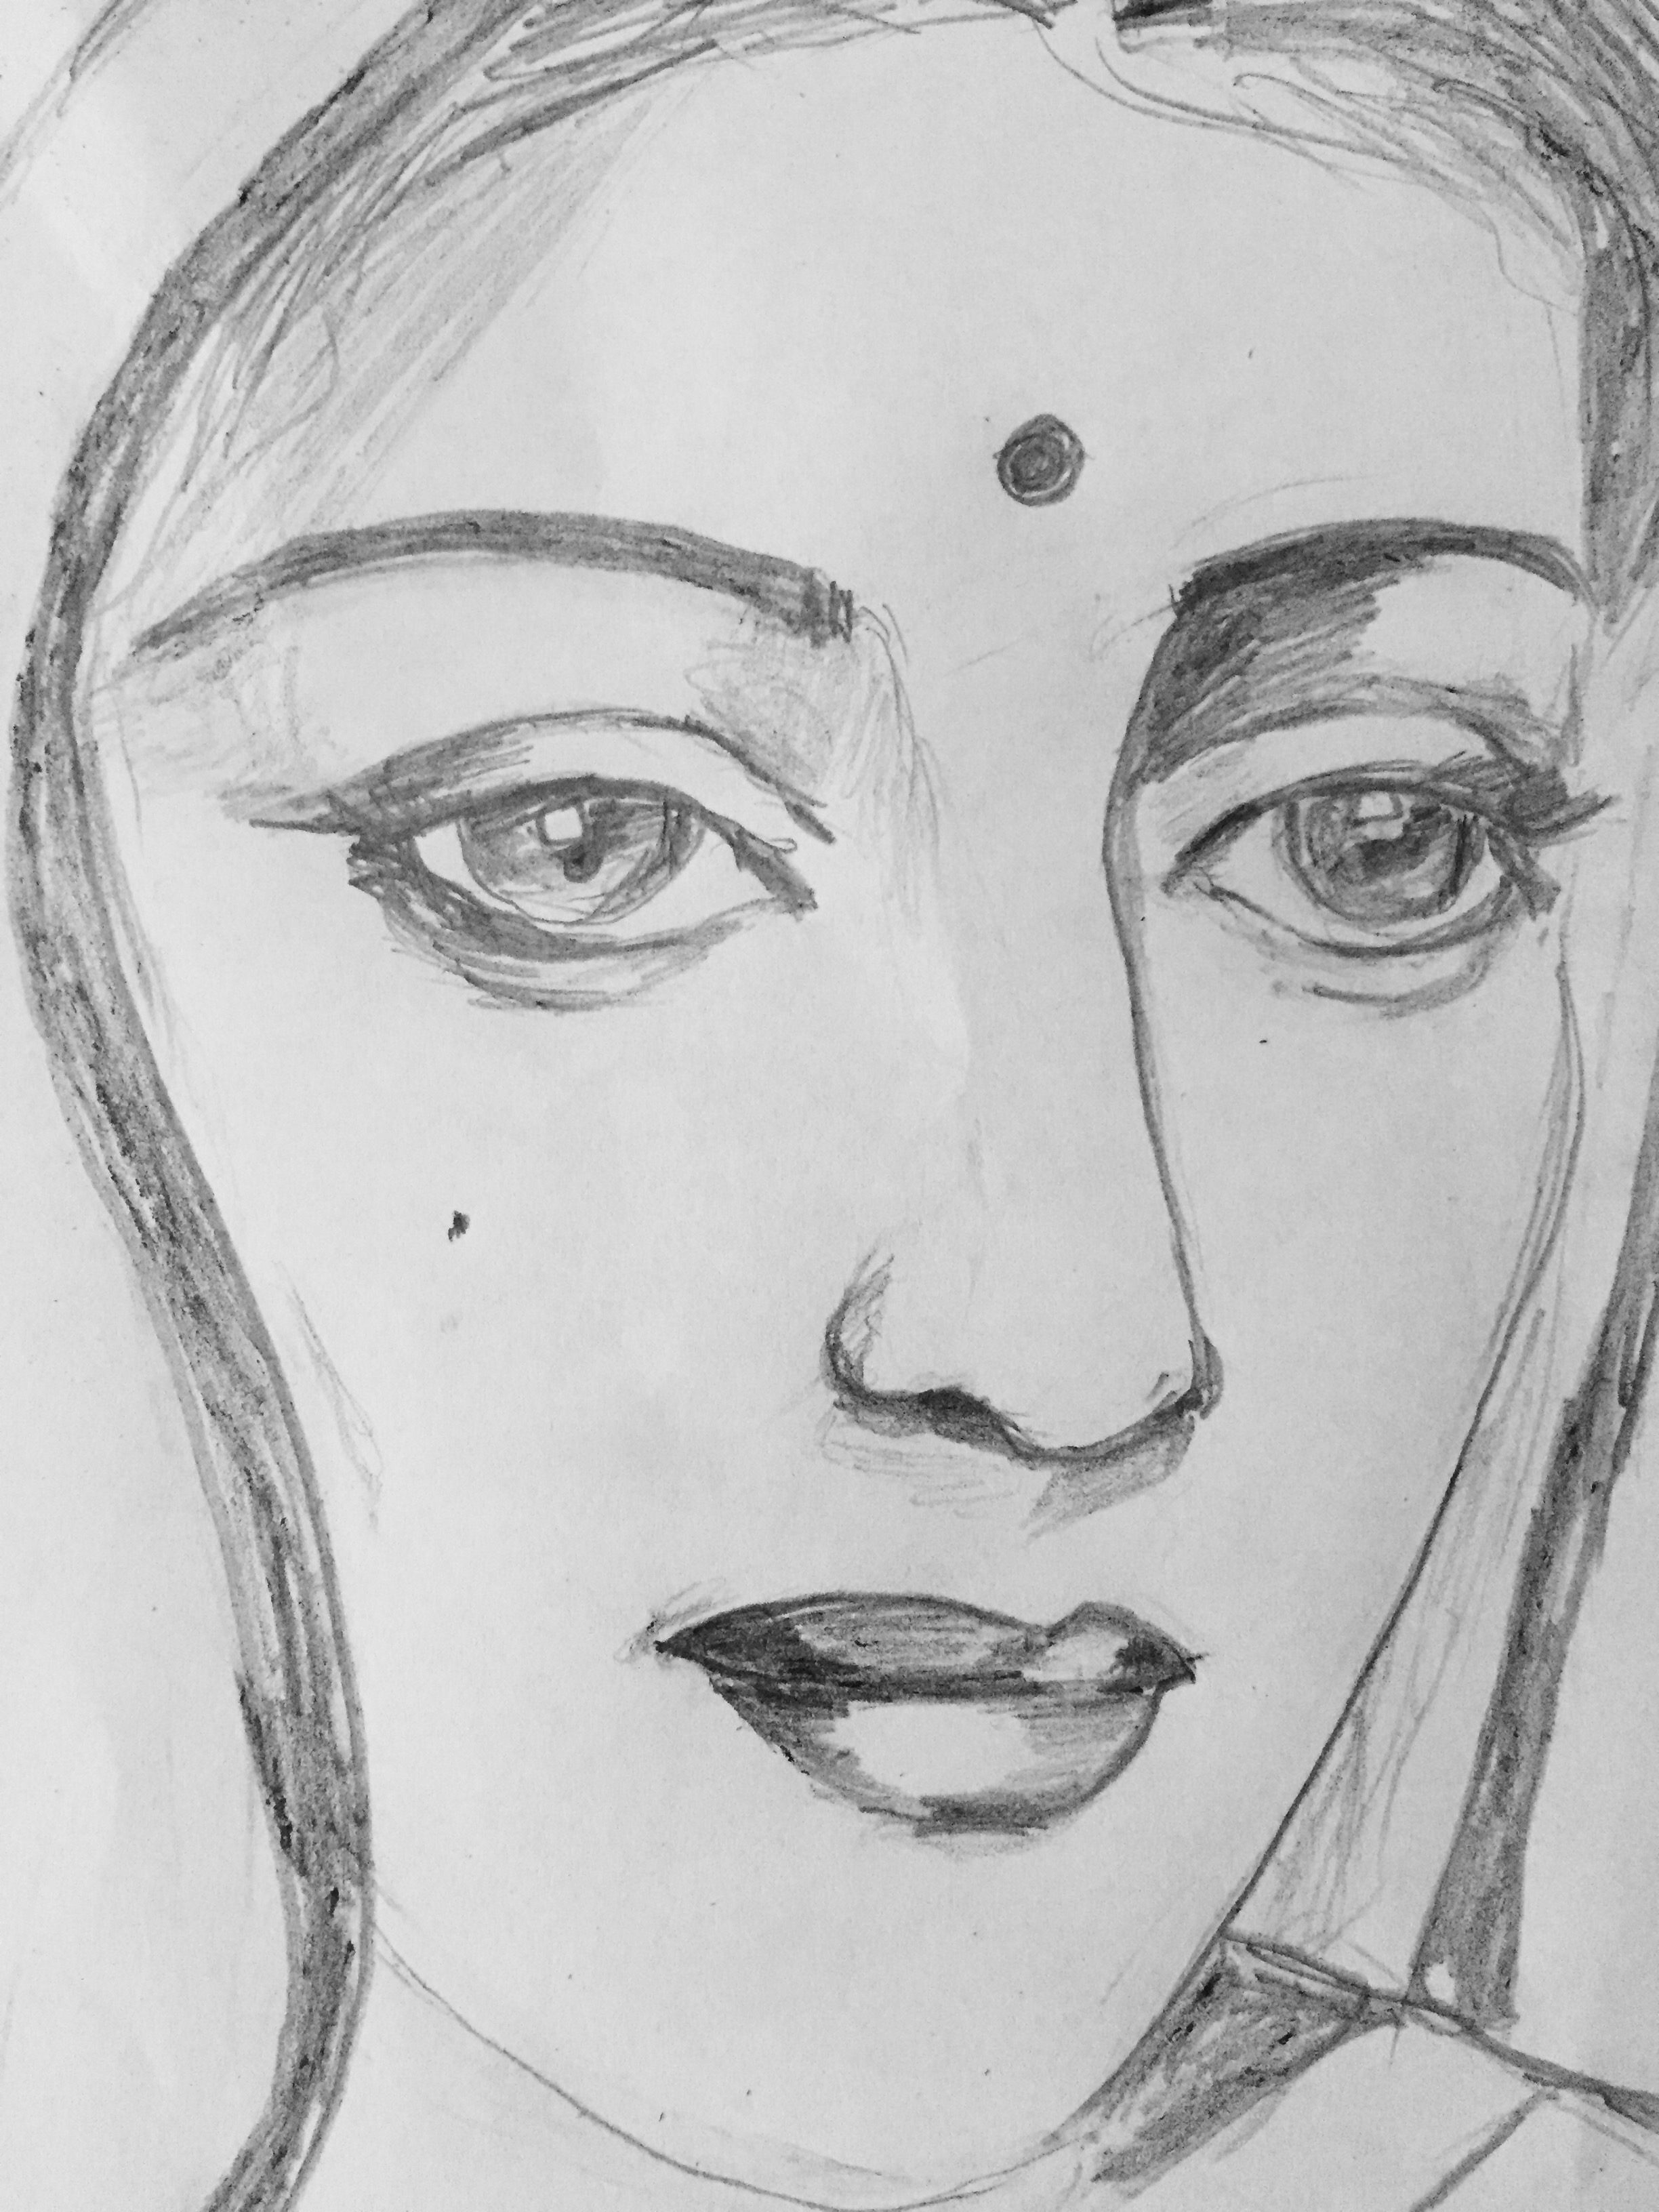 Indian Woman Sketch at PaintingValley.com | Explore collection of ...